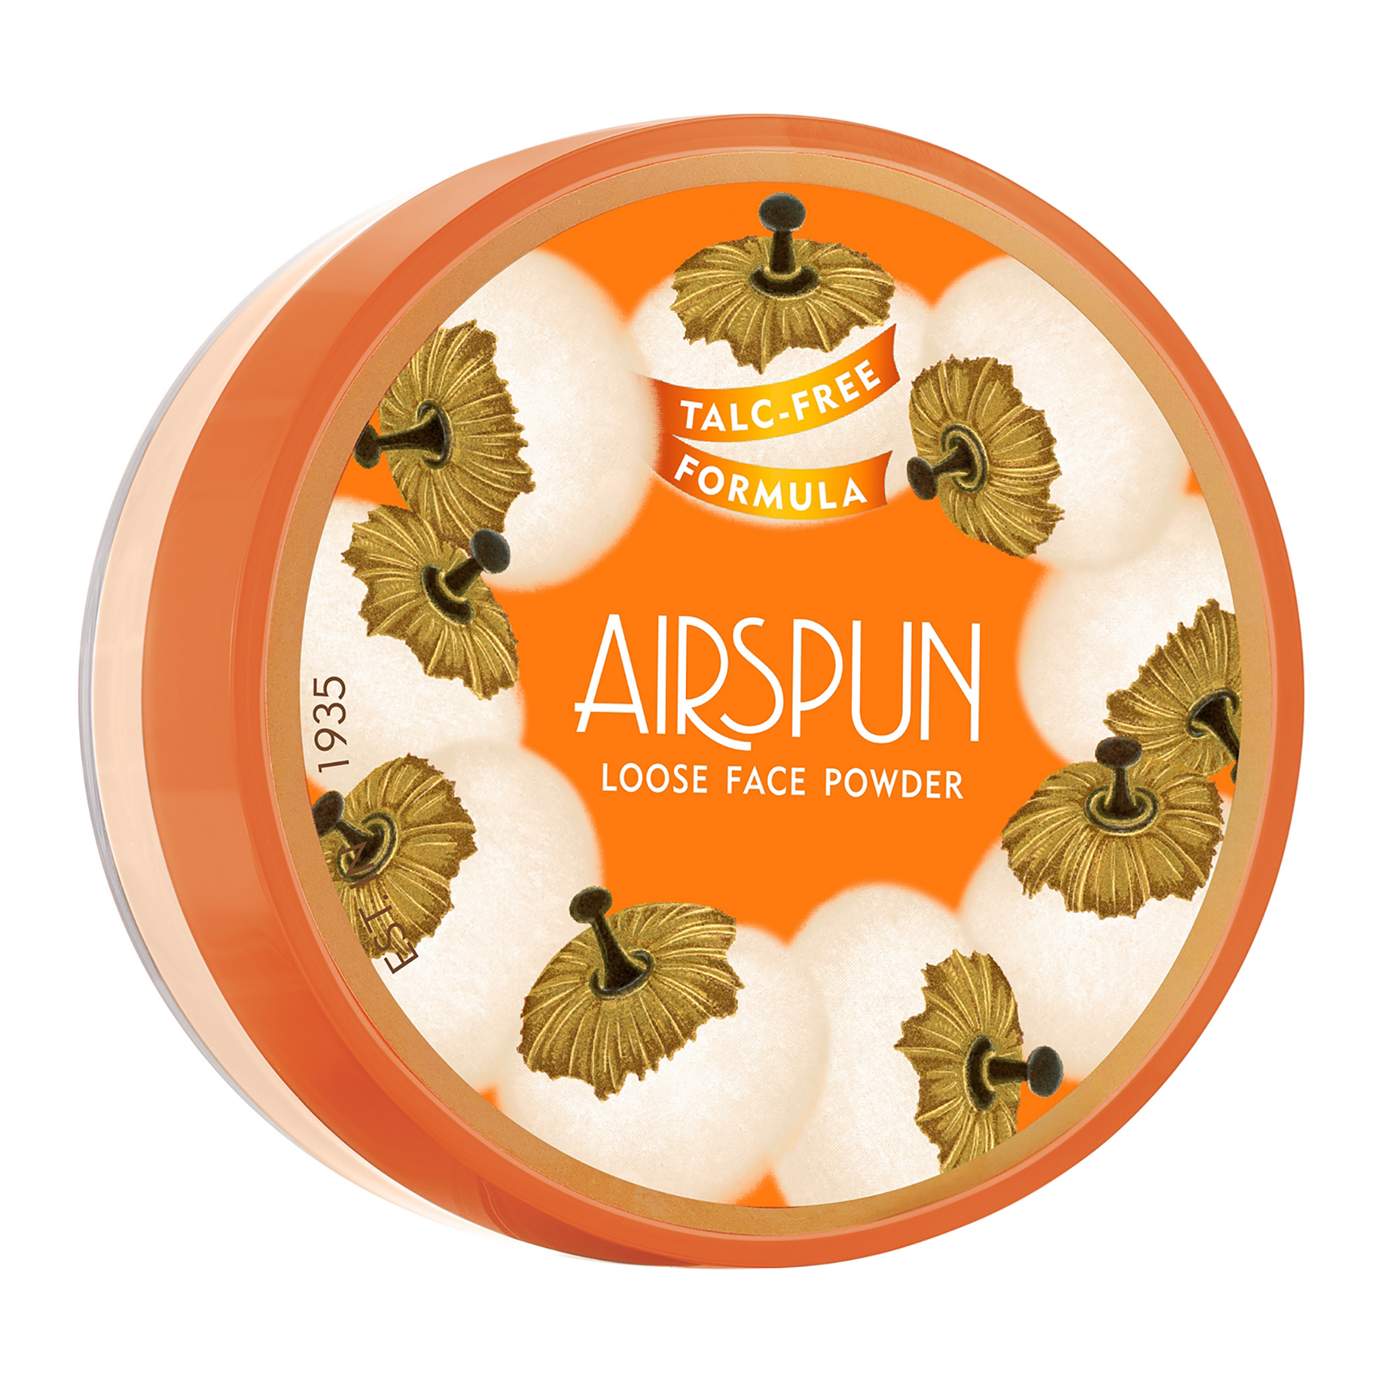 Coty Airspun Loose Face Powder - Translucent Extra Coverage; image 1 of 6